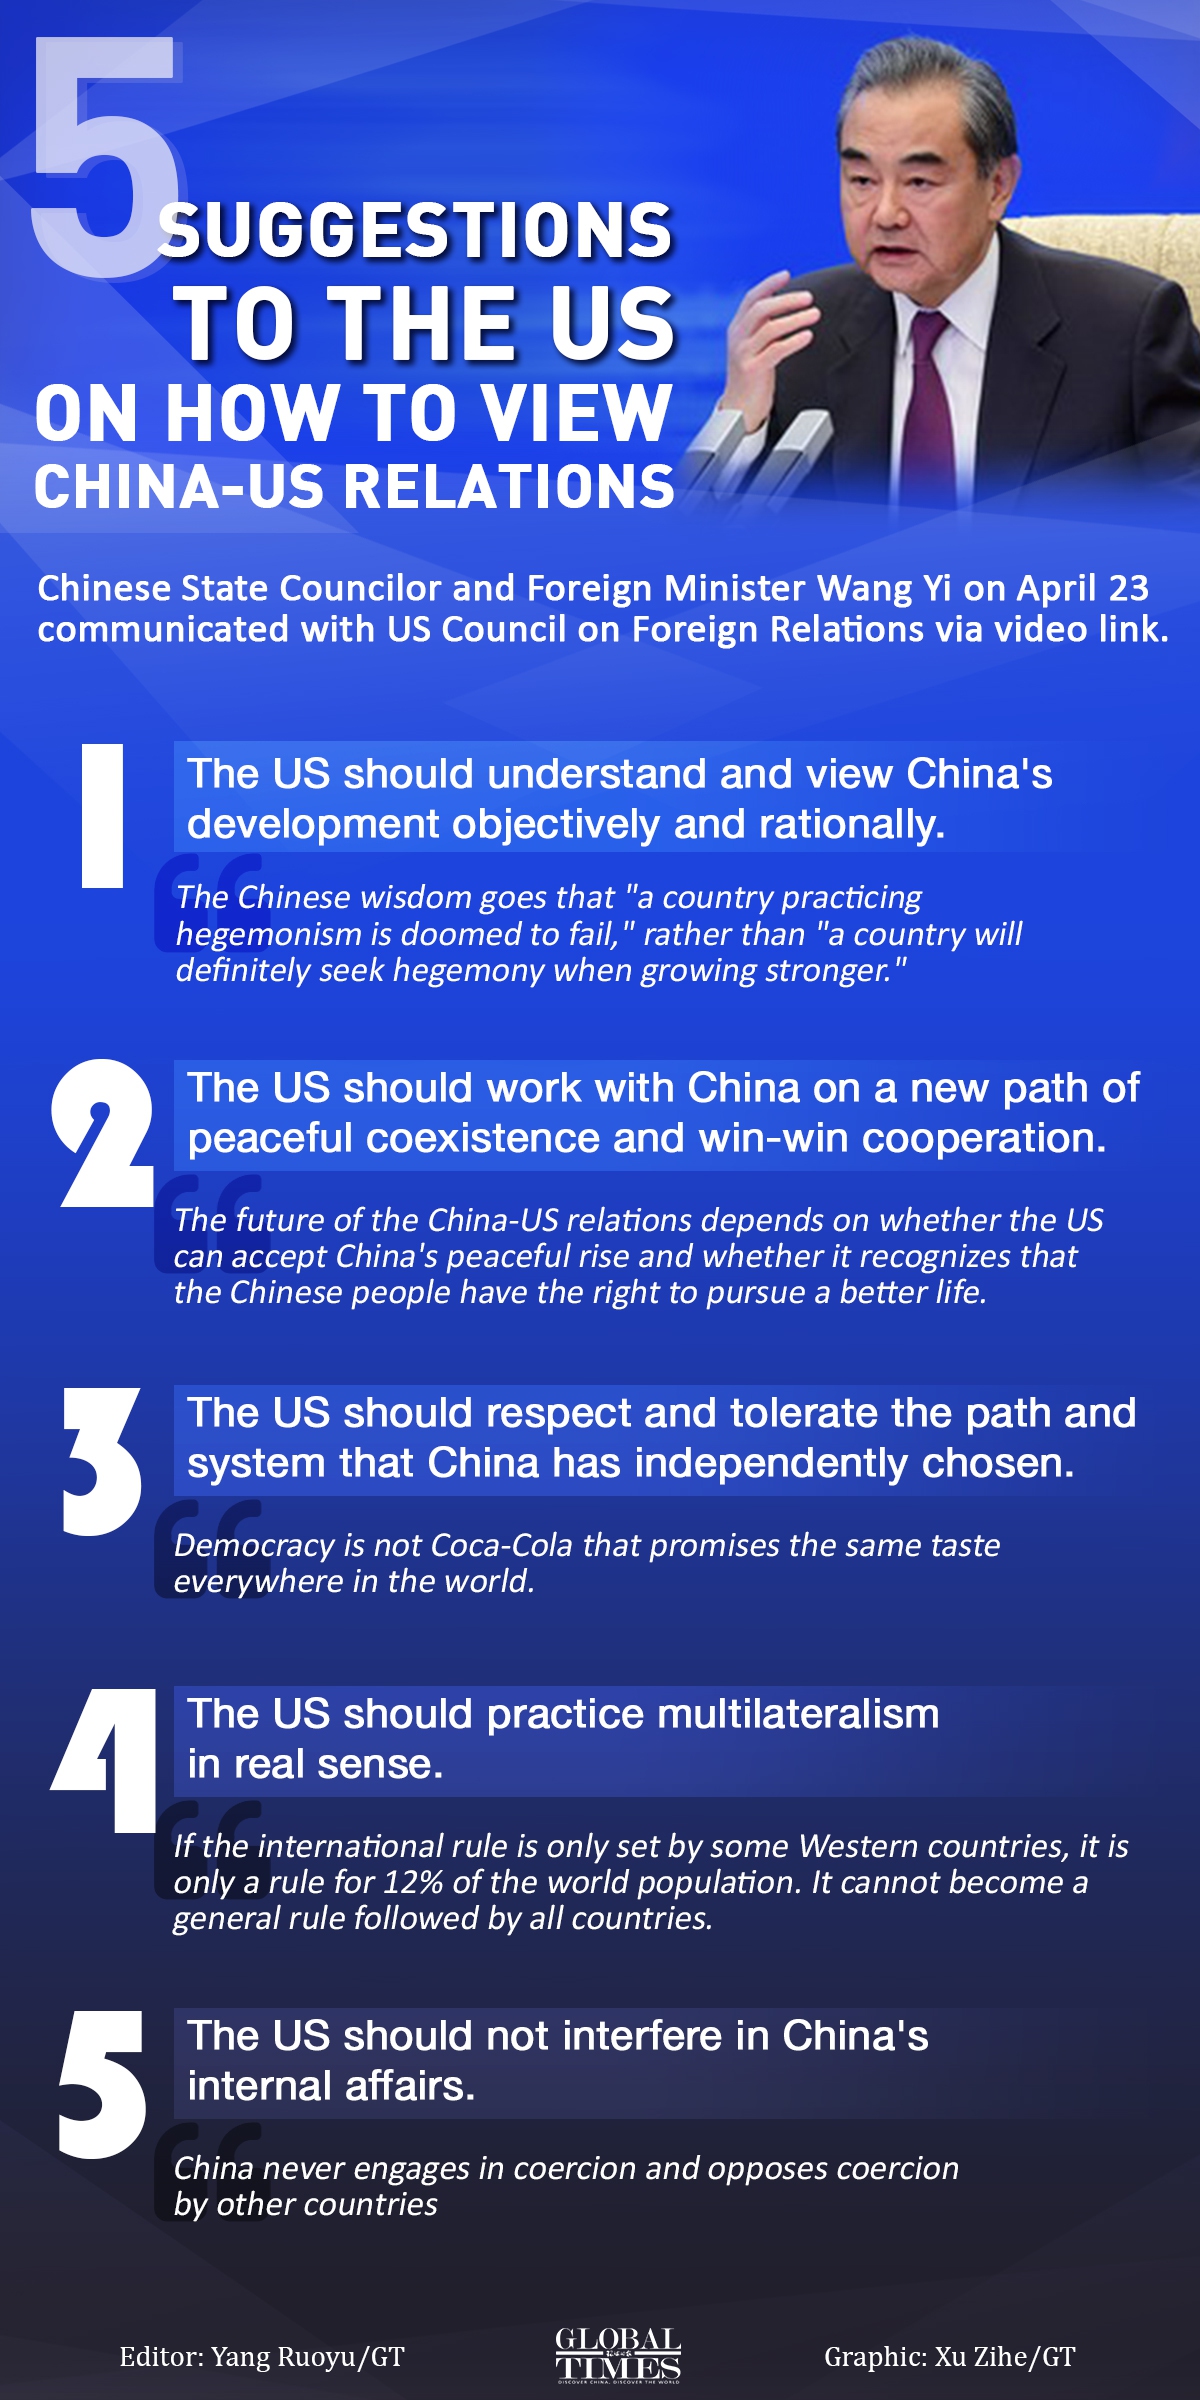 5 suggestions to the US on how to view China-US relations